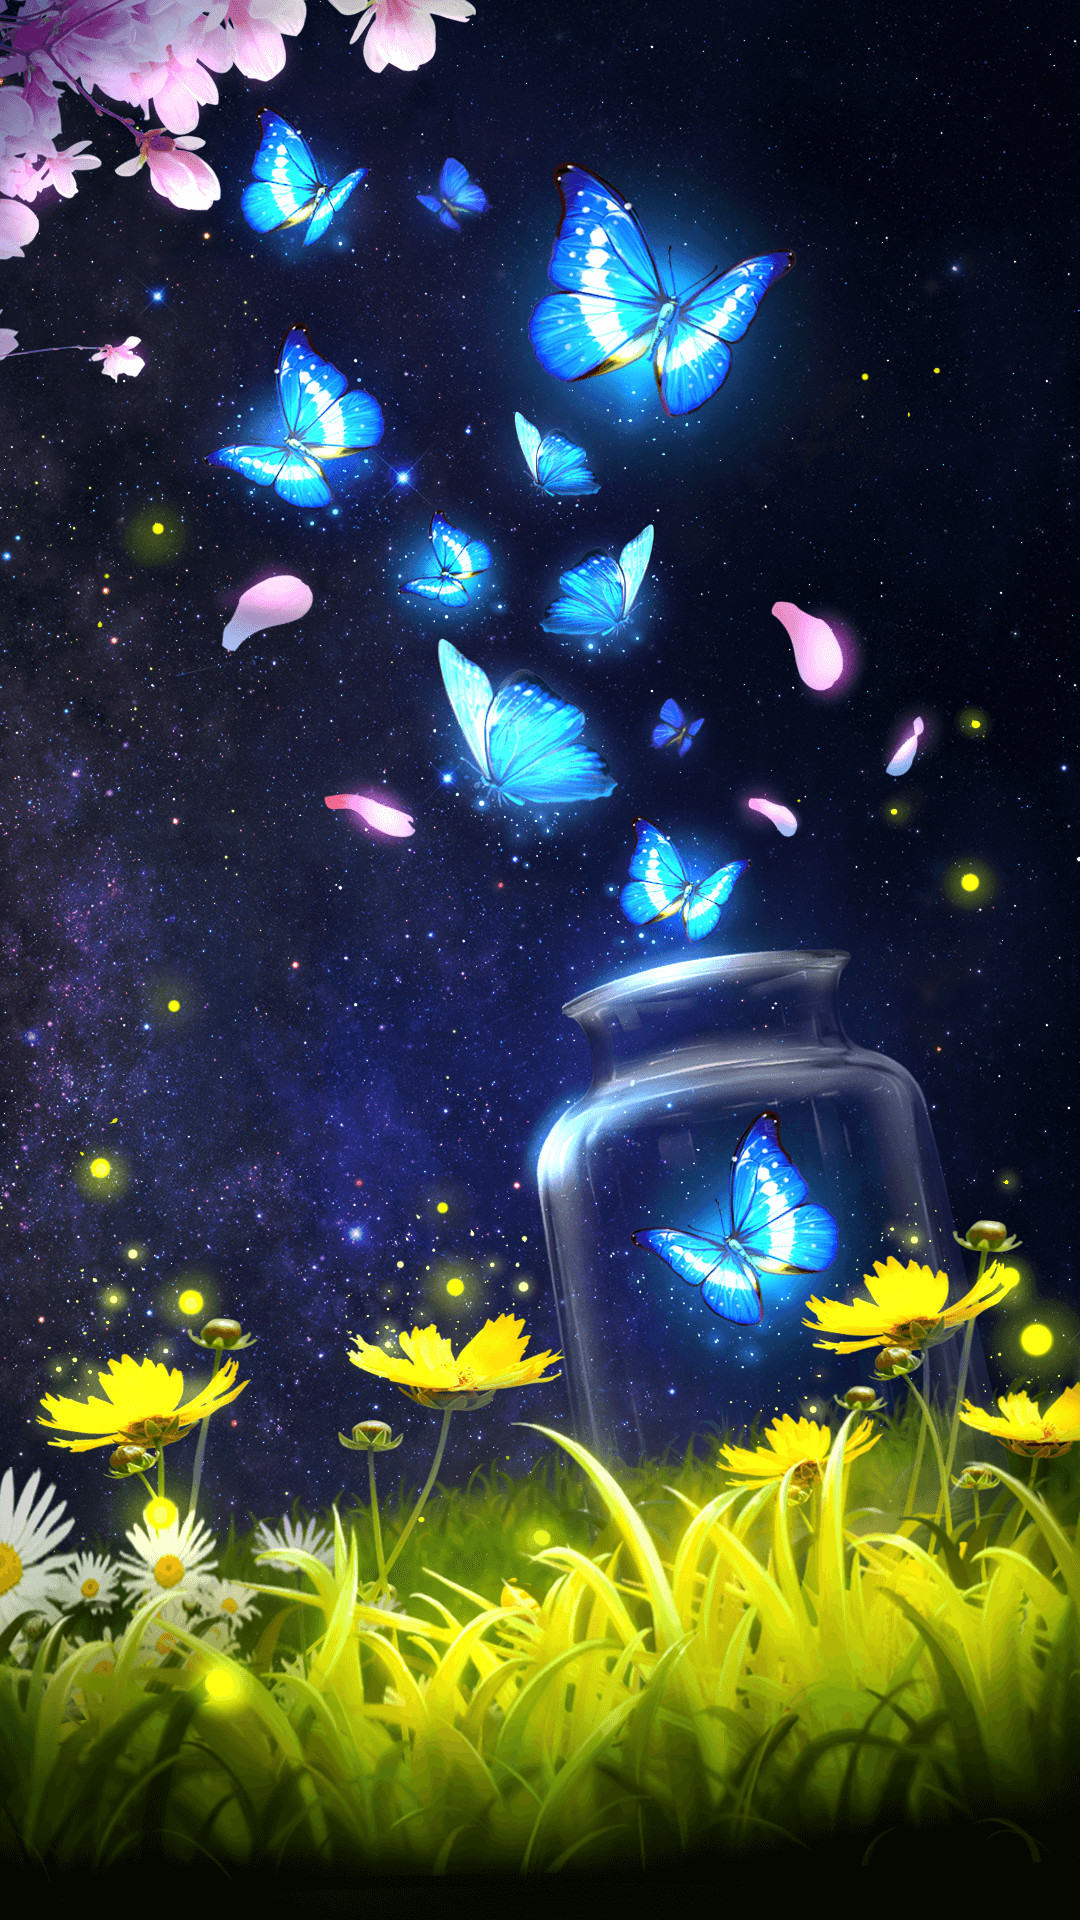 1080x1920 Android live wallpaper/background!Shiny blue butterfly live wallpaper with  starry sky as background